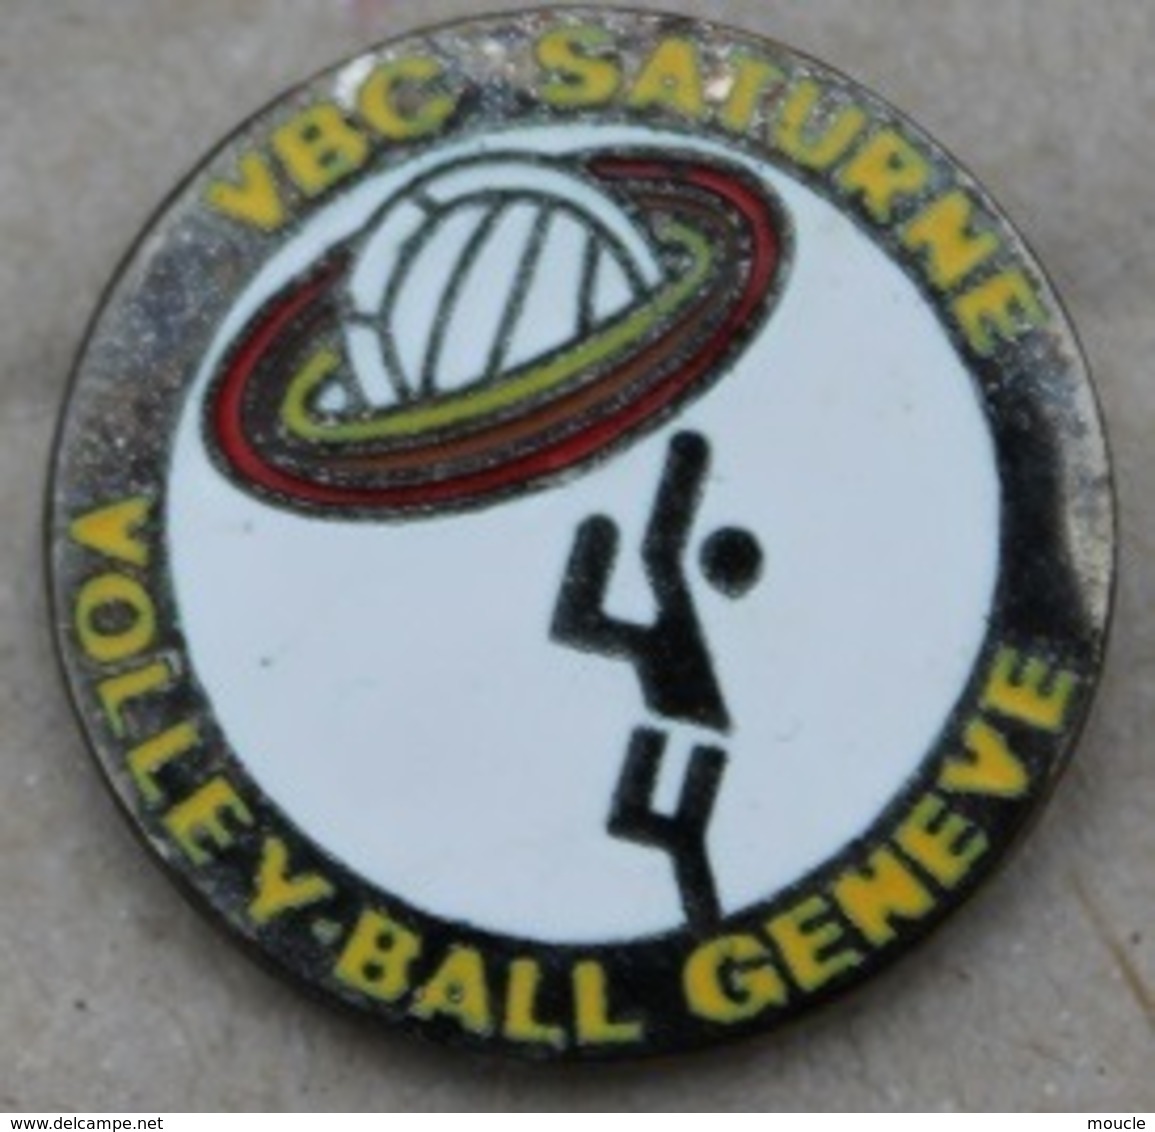 VBC SATURNE  GENEVE  - SUISSE - BALLON - VOLLEYBALL - VOLLEY BALL -              (20) - Volleyball